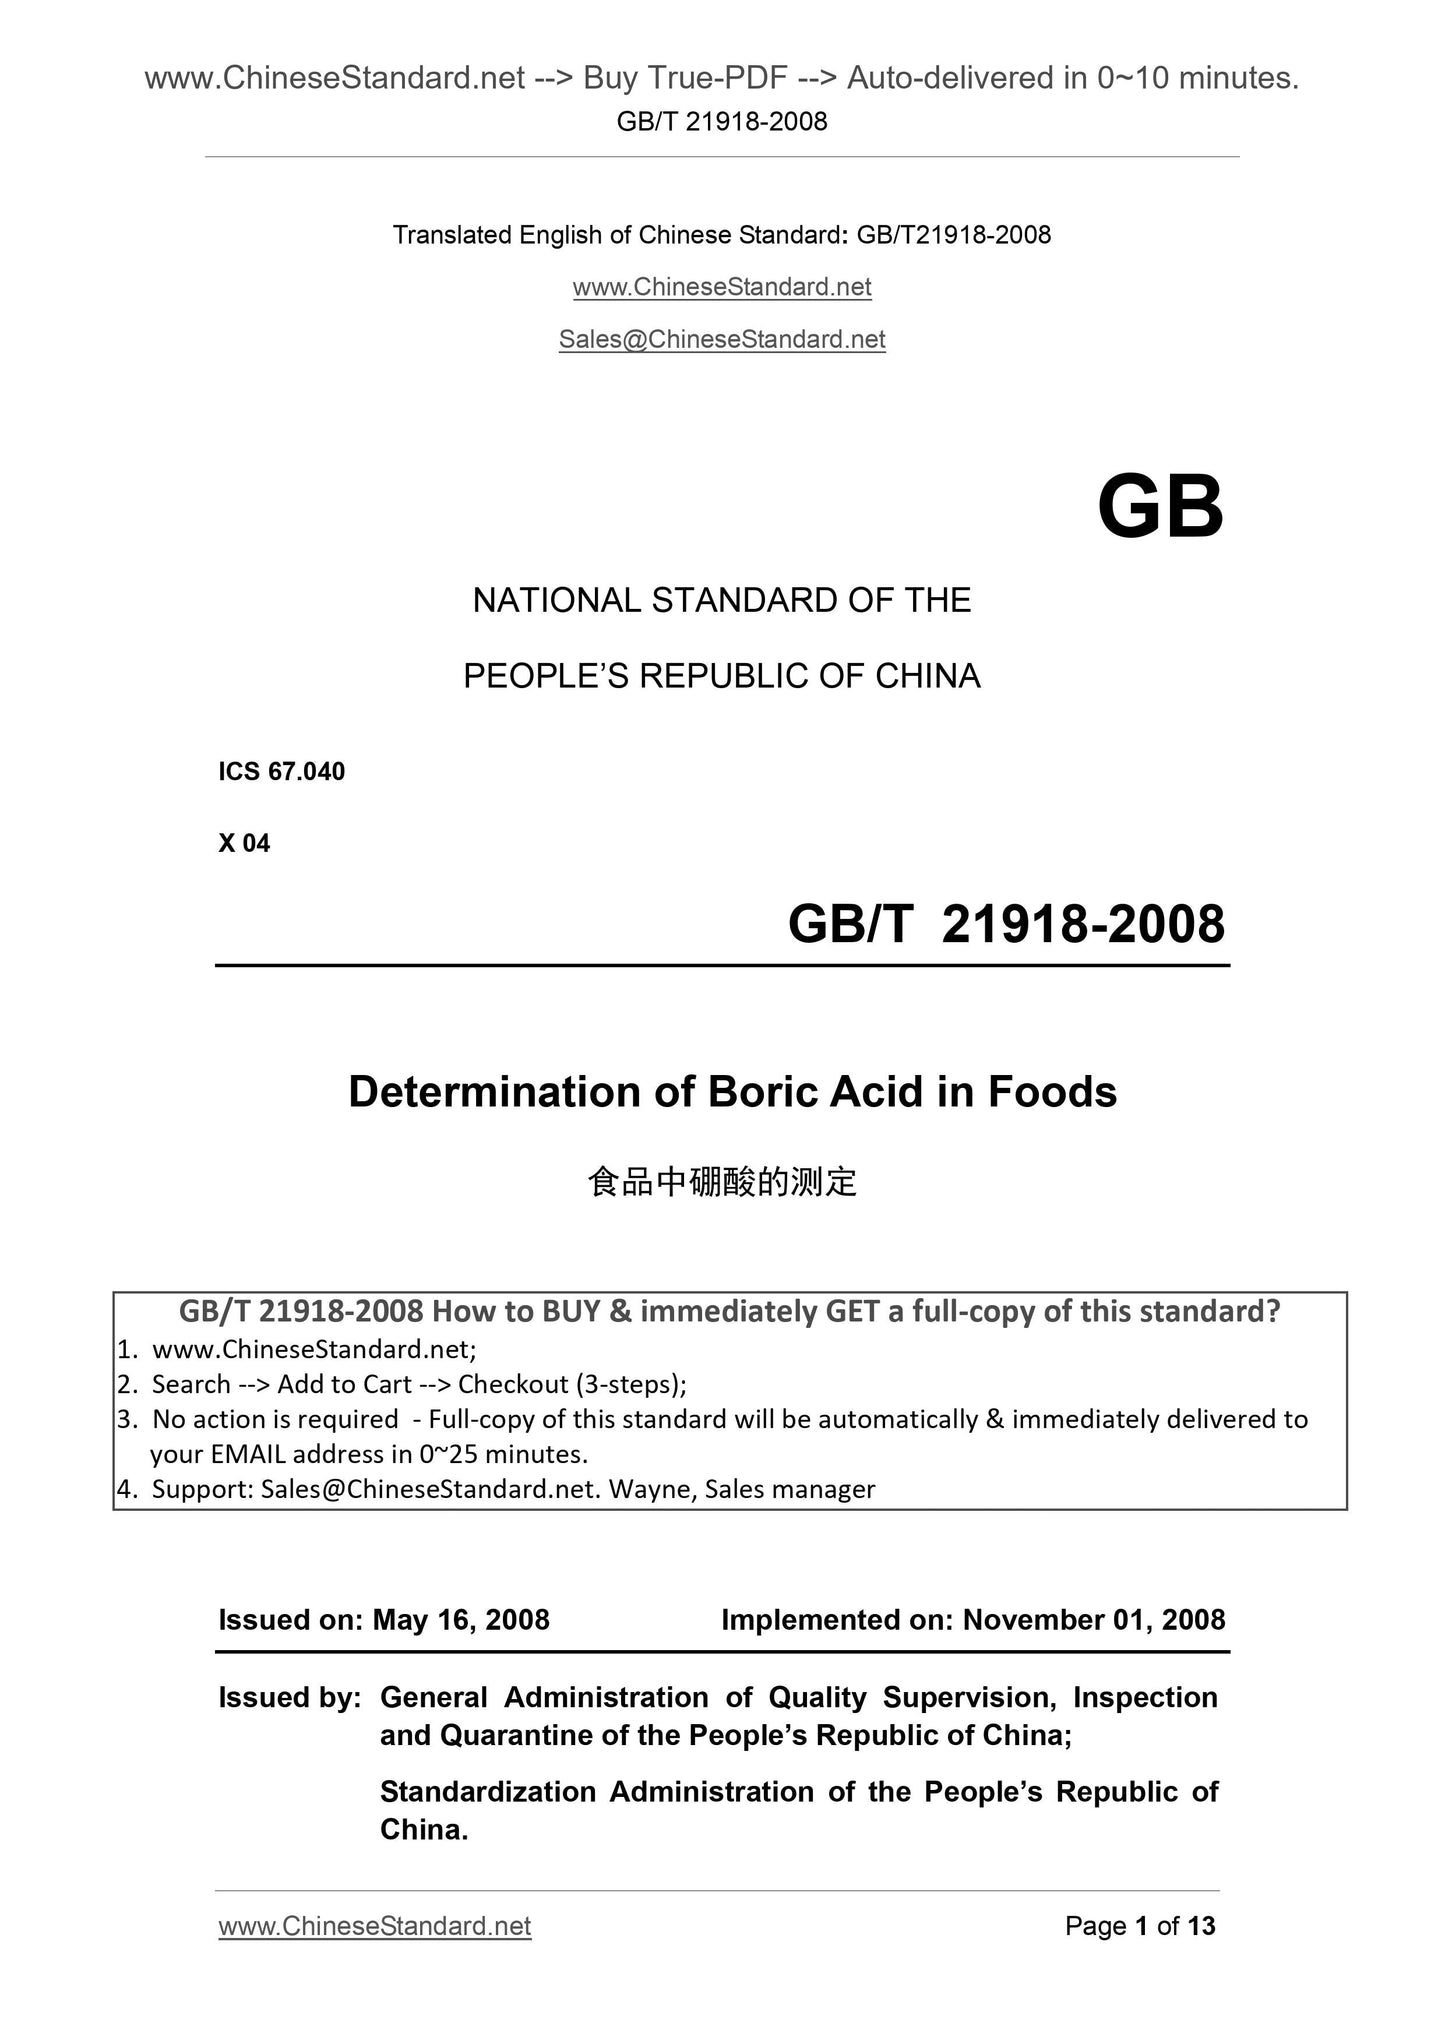 GB/T 21918-2008 Page 1